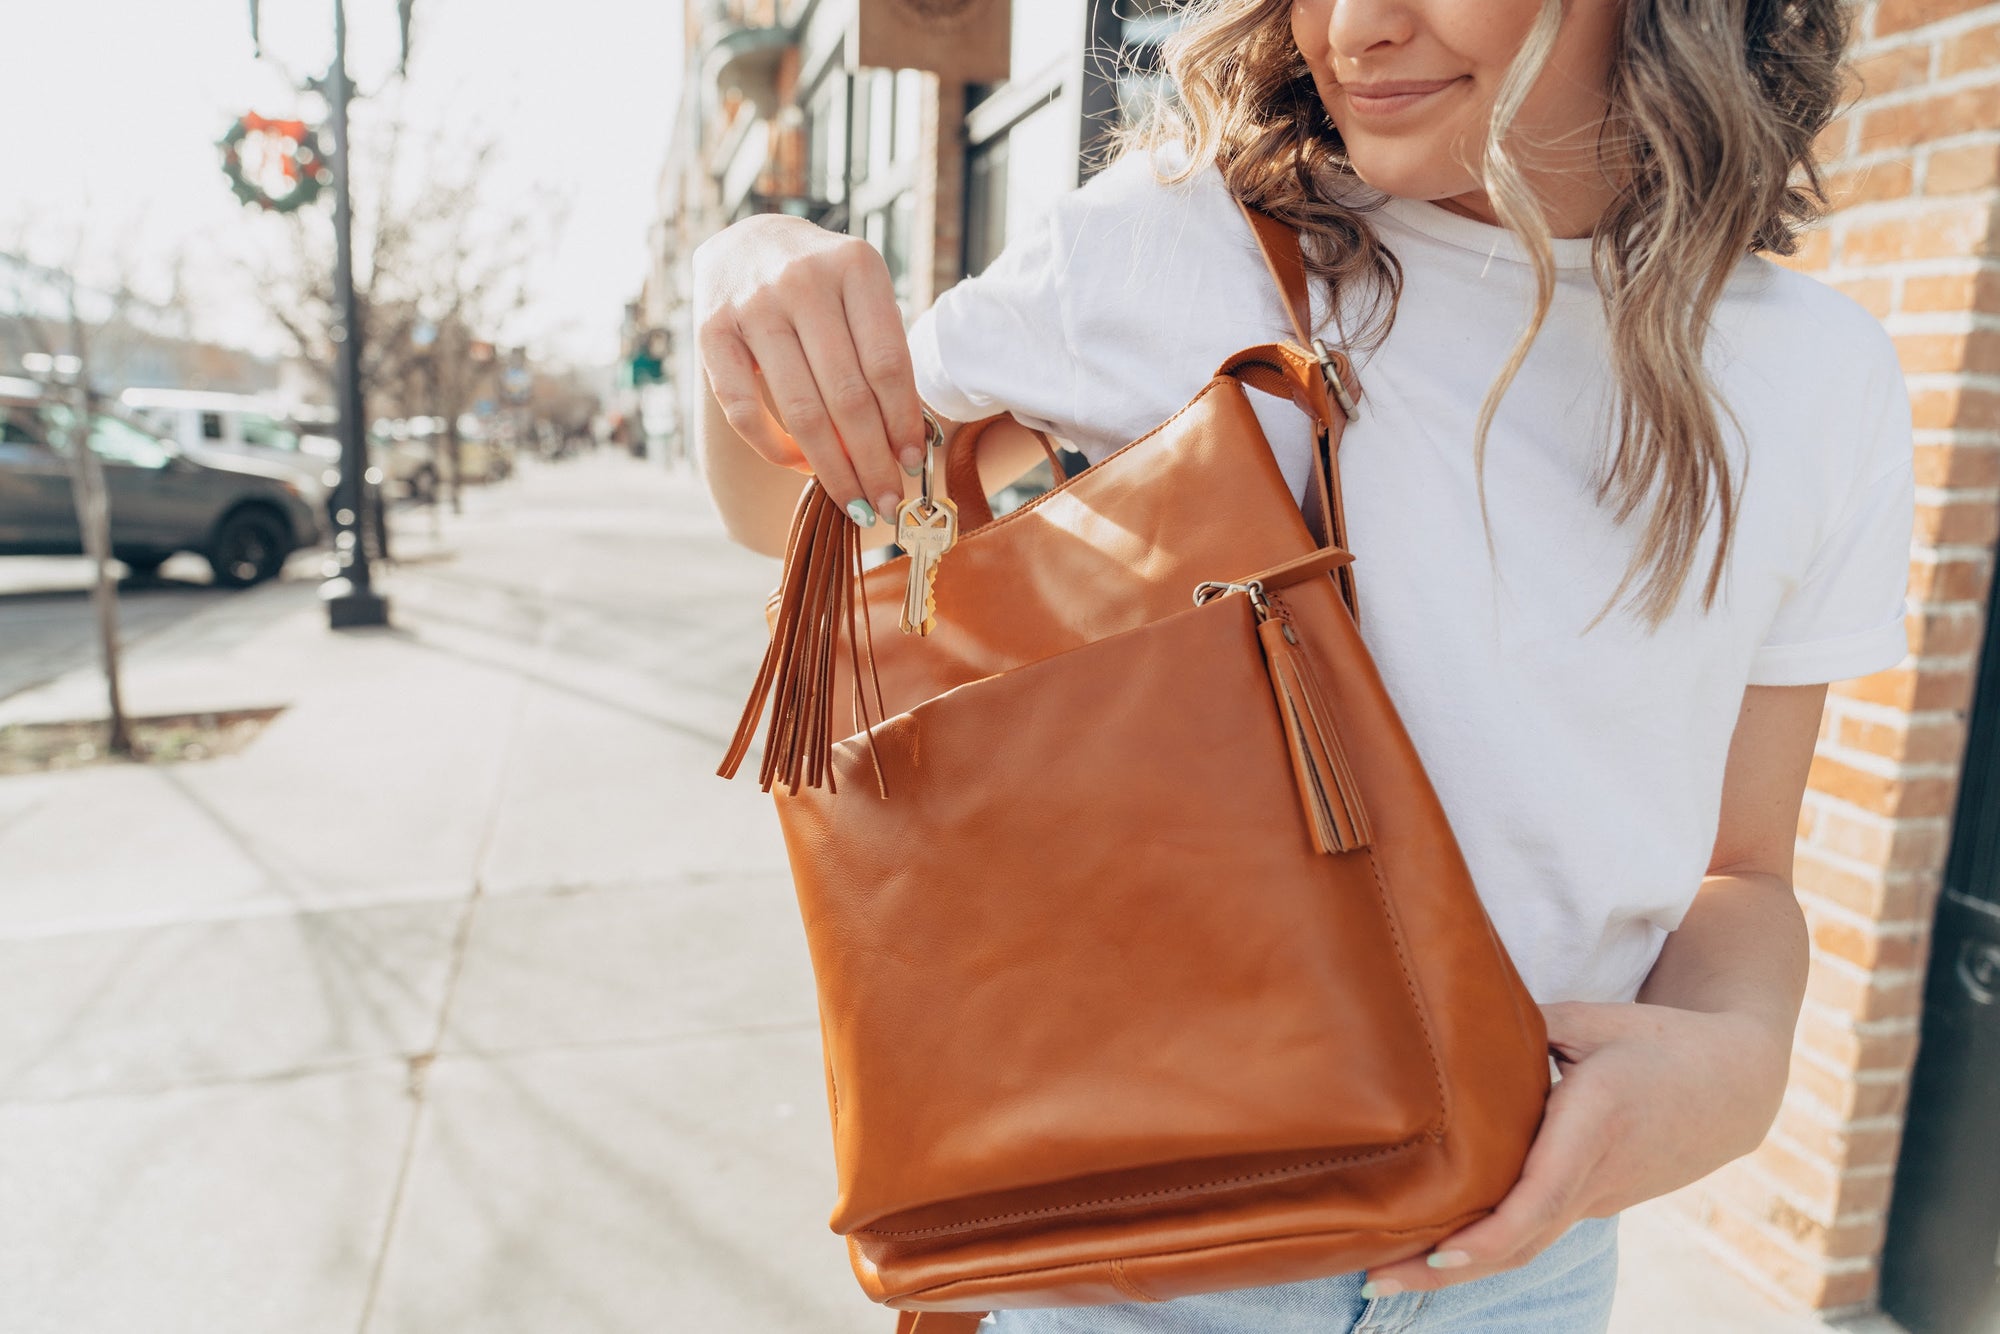 Full Grain Leather: What Is It and Why Do We Use It?